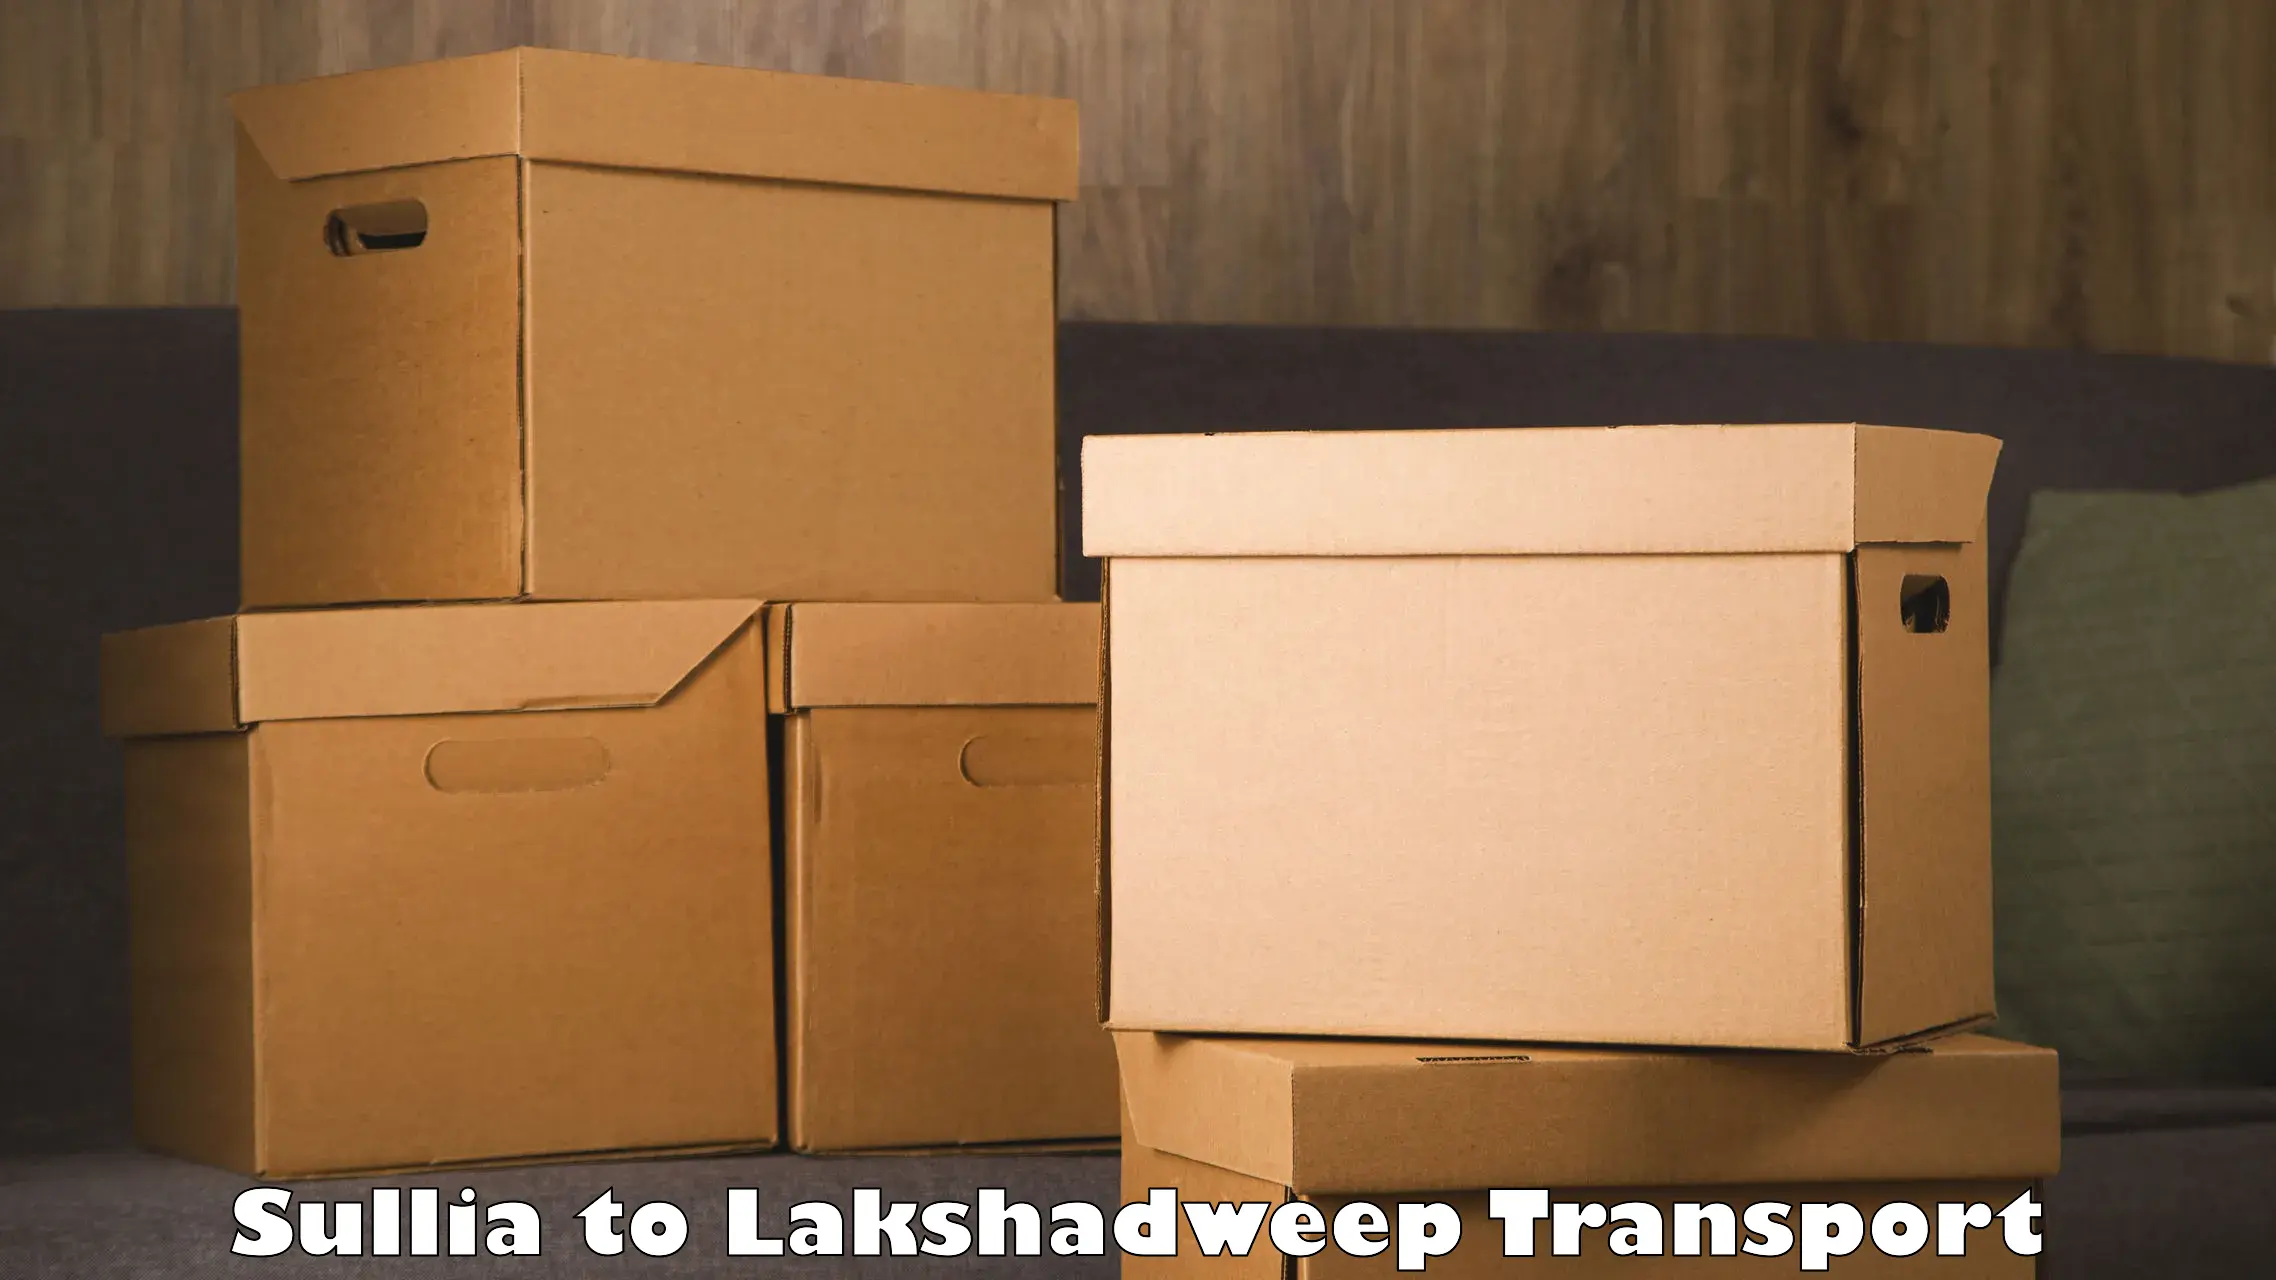 Container transport service Sullia to Lakshadweep